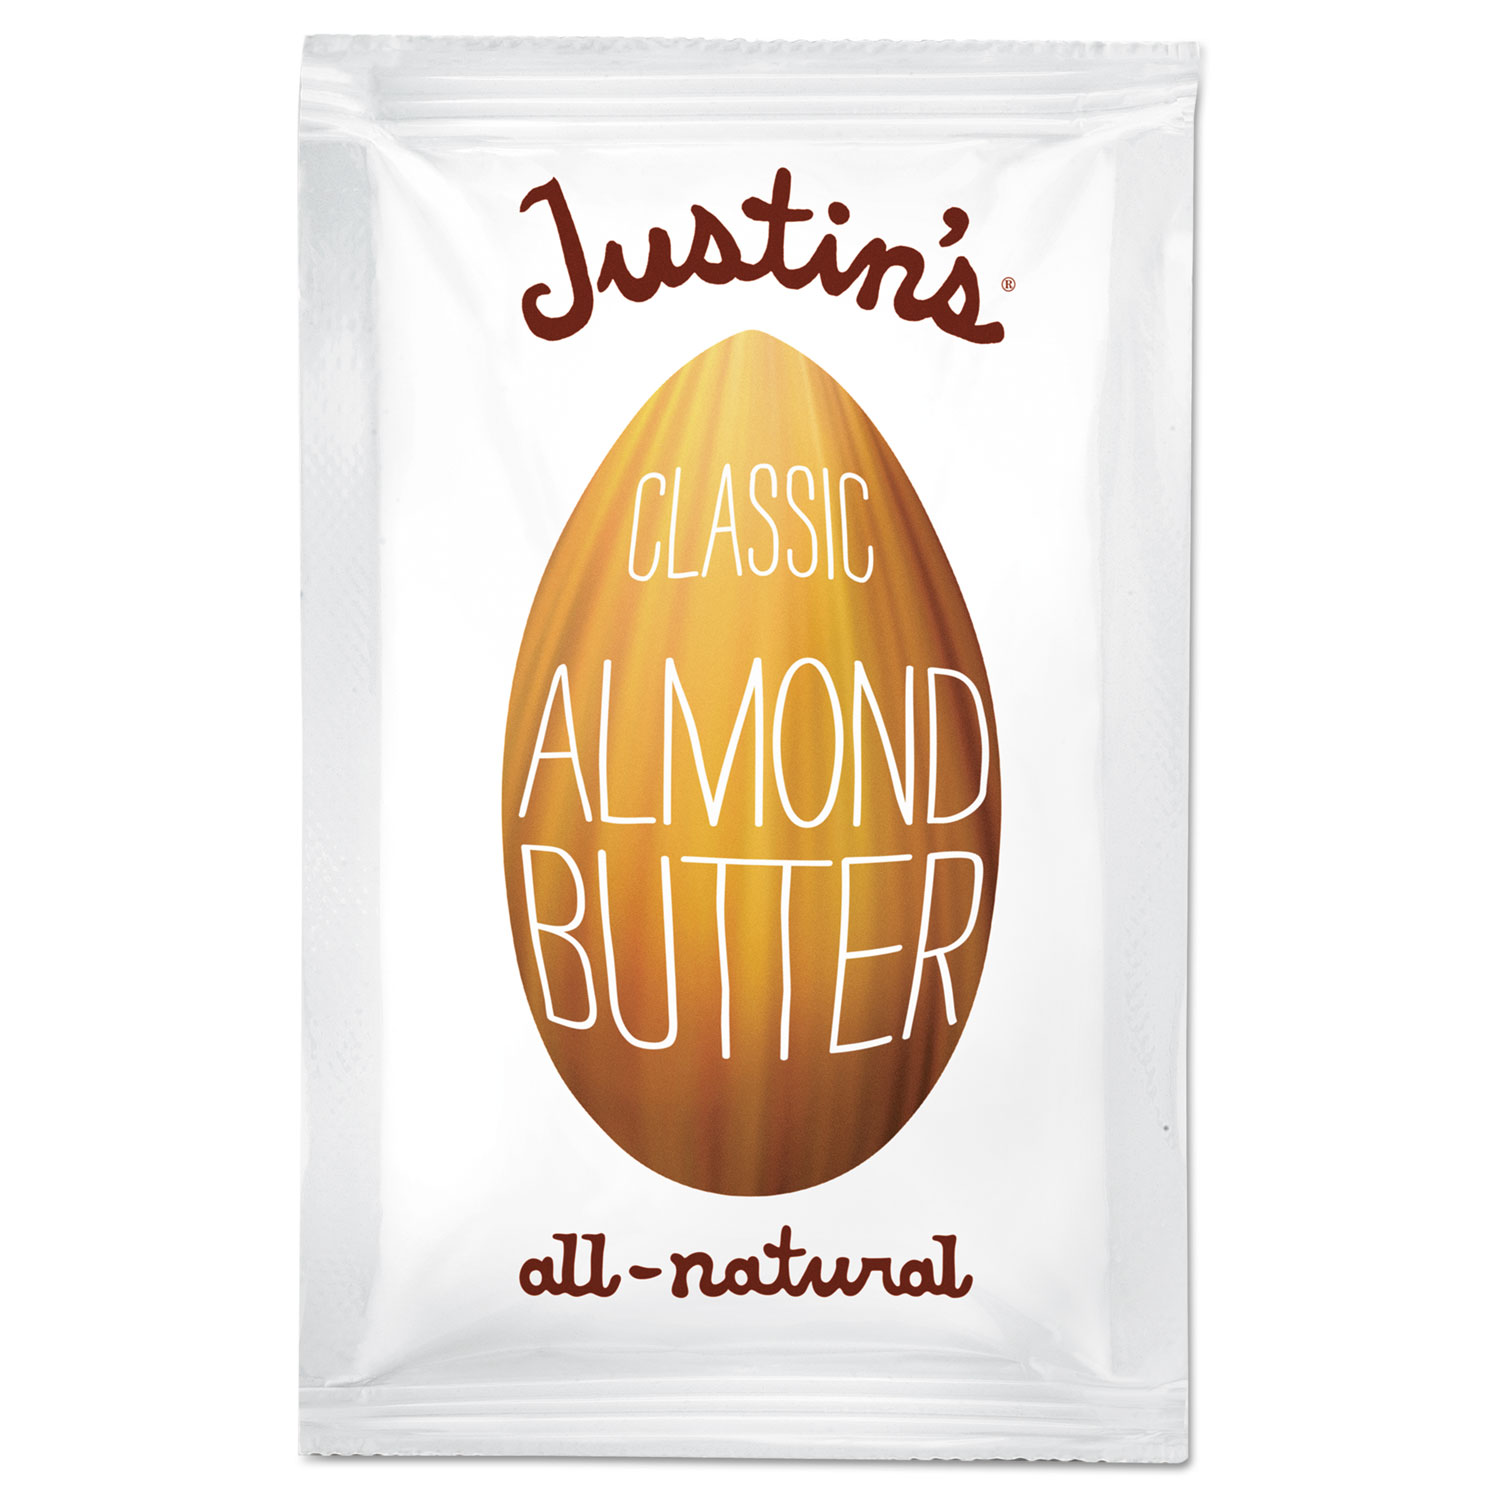 Classic Almond Butter, 1.15 oz Squeeze Pack, 10/Box